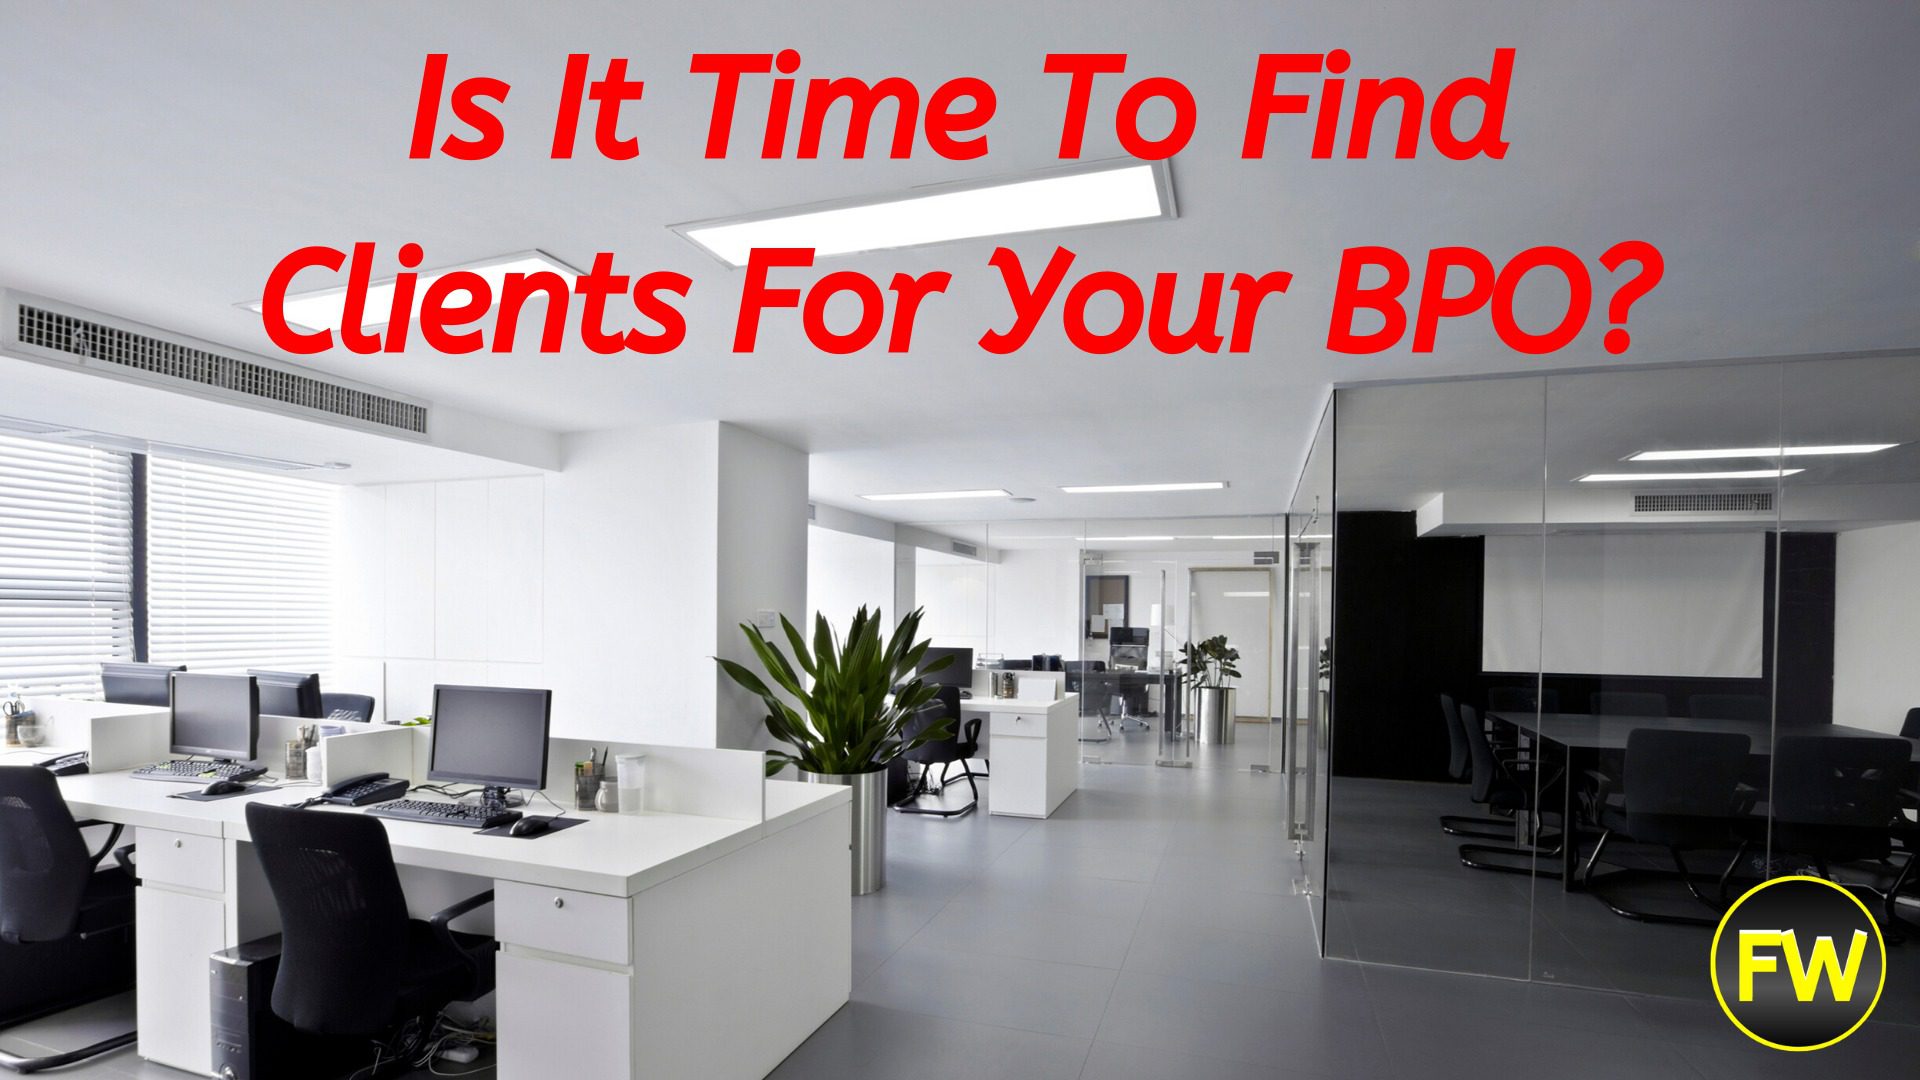 How To Get Clients For A BPO